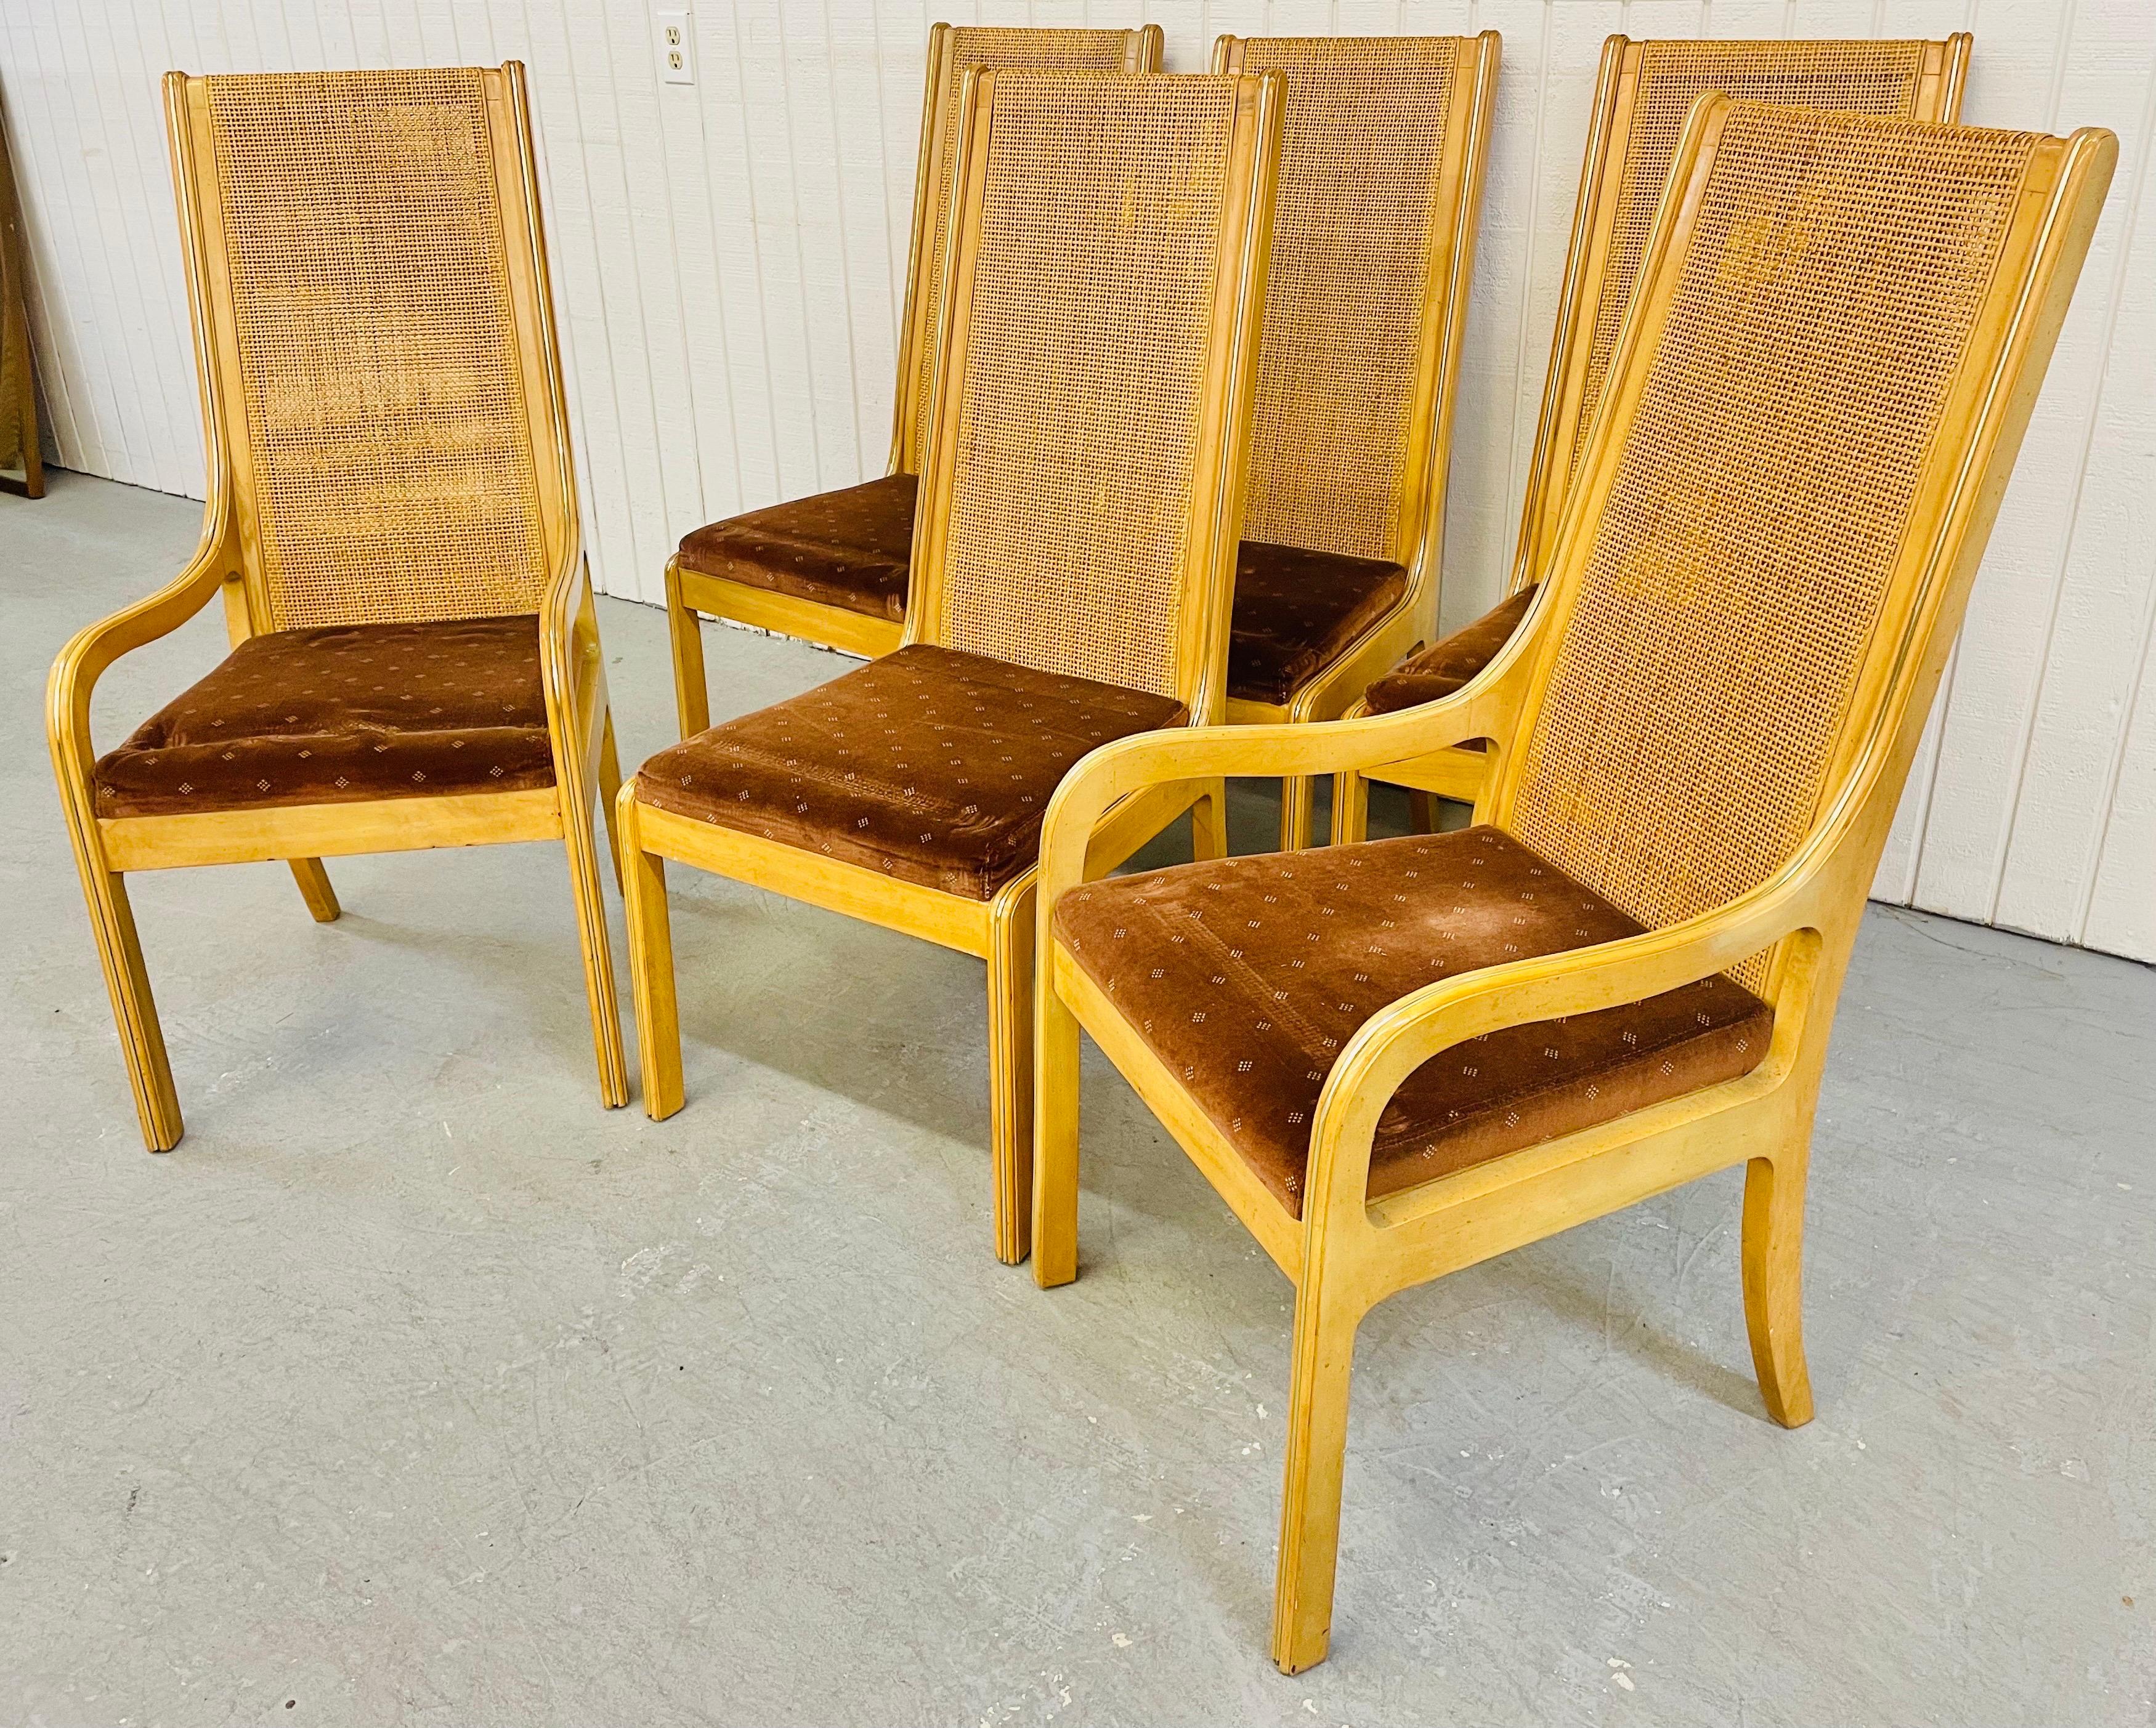 This listing is for a set of six vintage Burled wood dining chairs. Featuring two arm chairs, four straight chairs, brass accents, original upholstery, and a high back cane wrapped design.